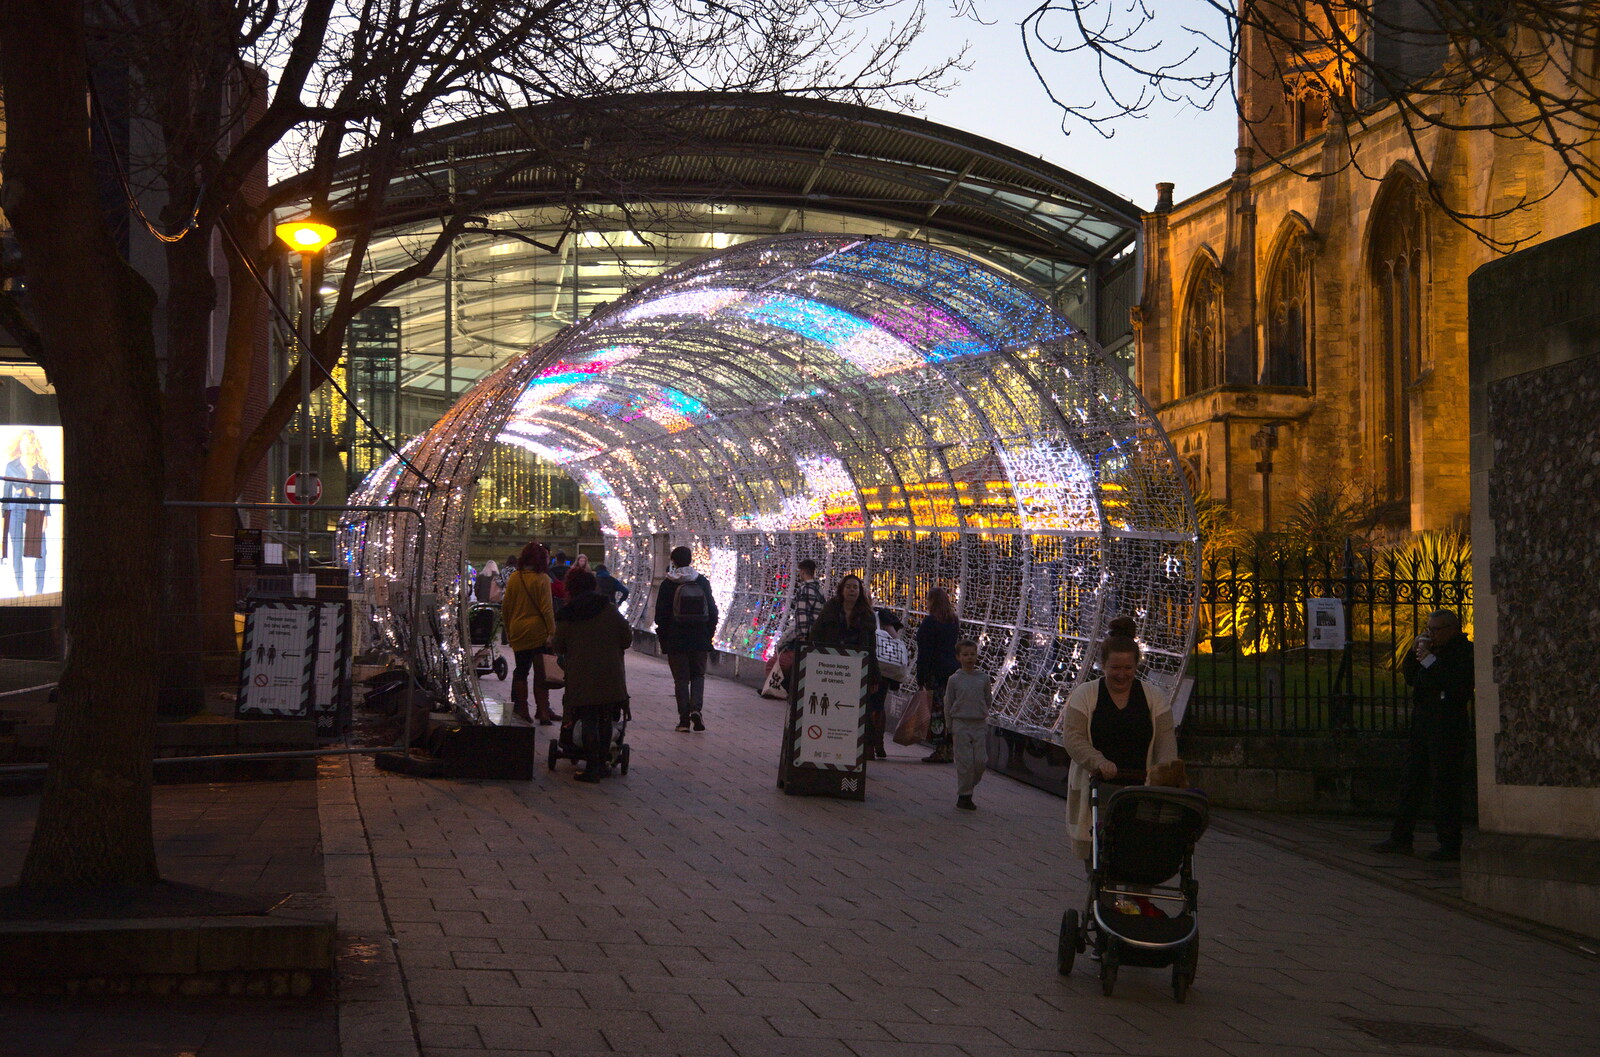 The famous Light Tunnel is in action again from Christmas Shopping in Norwich, Norfolk - 21st December 2022